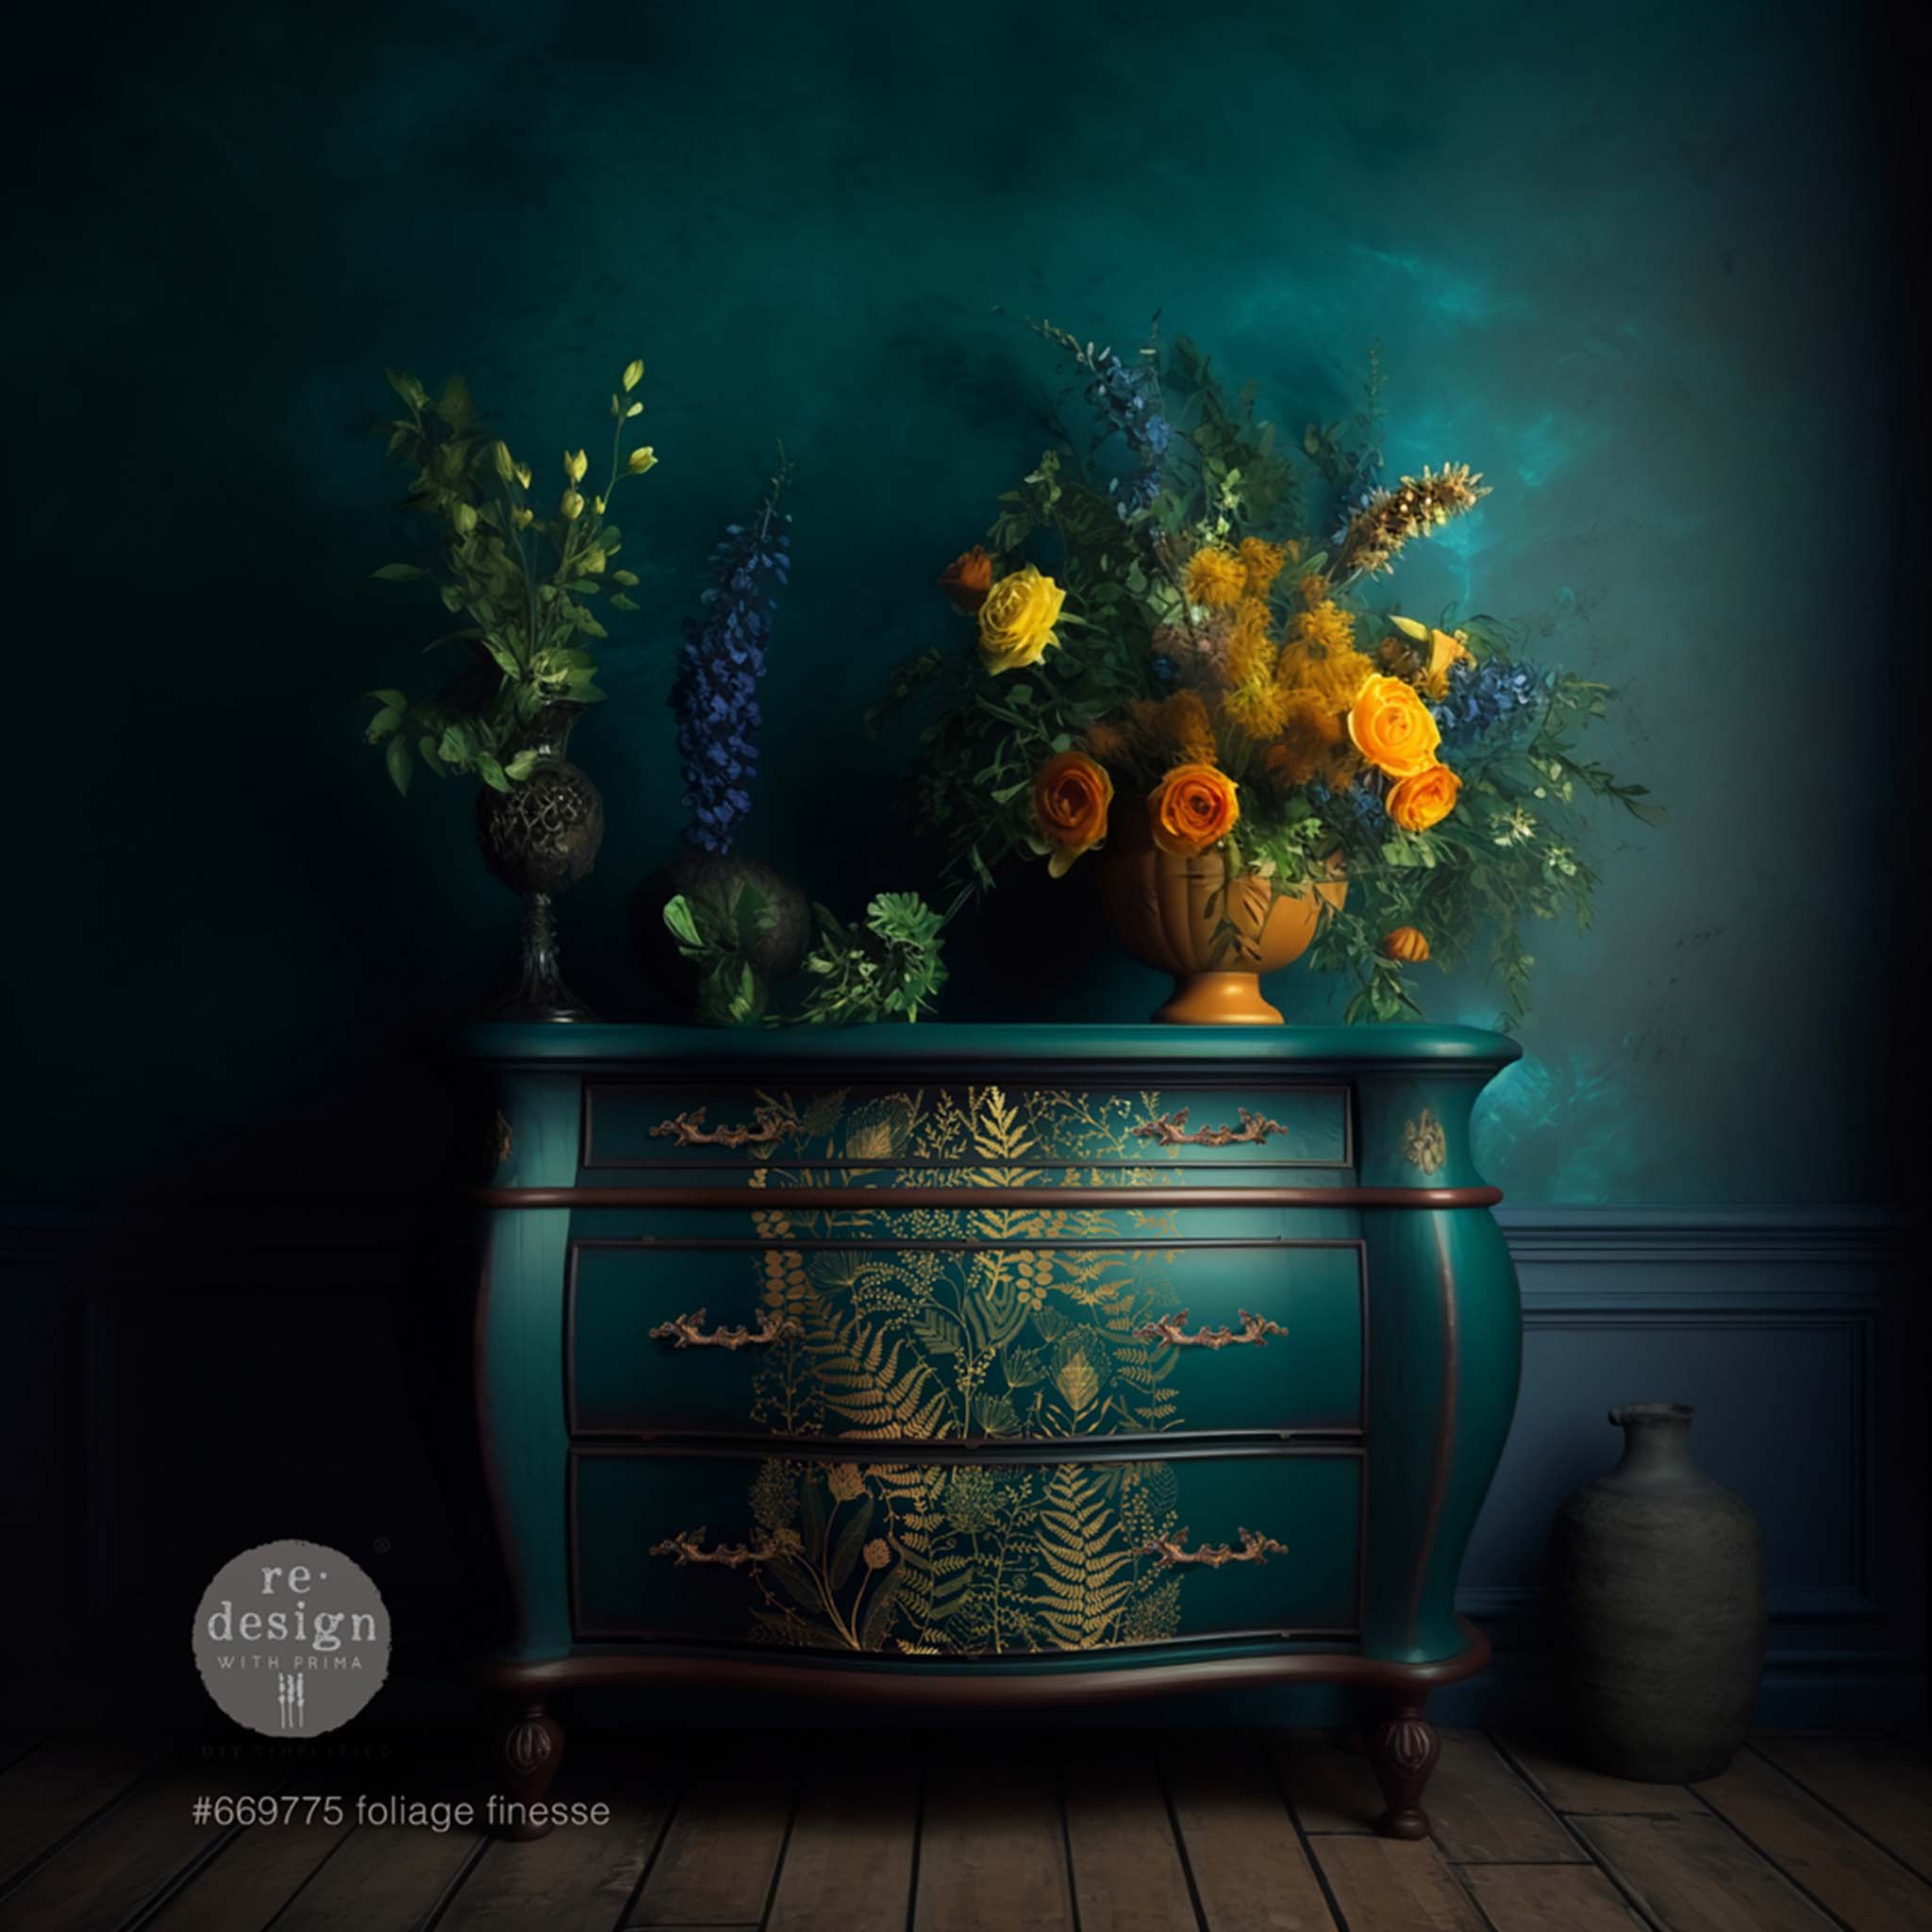 A vintage 3-drawer Bombay-style dresser is painted teal and features ReDesign with Prima's Foliage Finesse gold foil transfer in the center of its drawers.